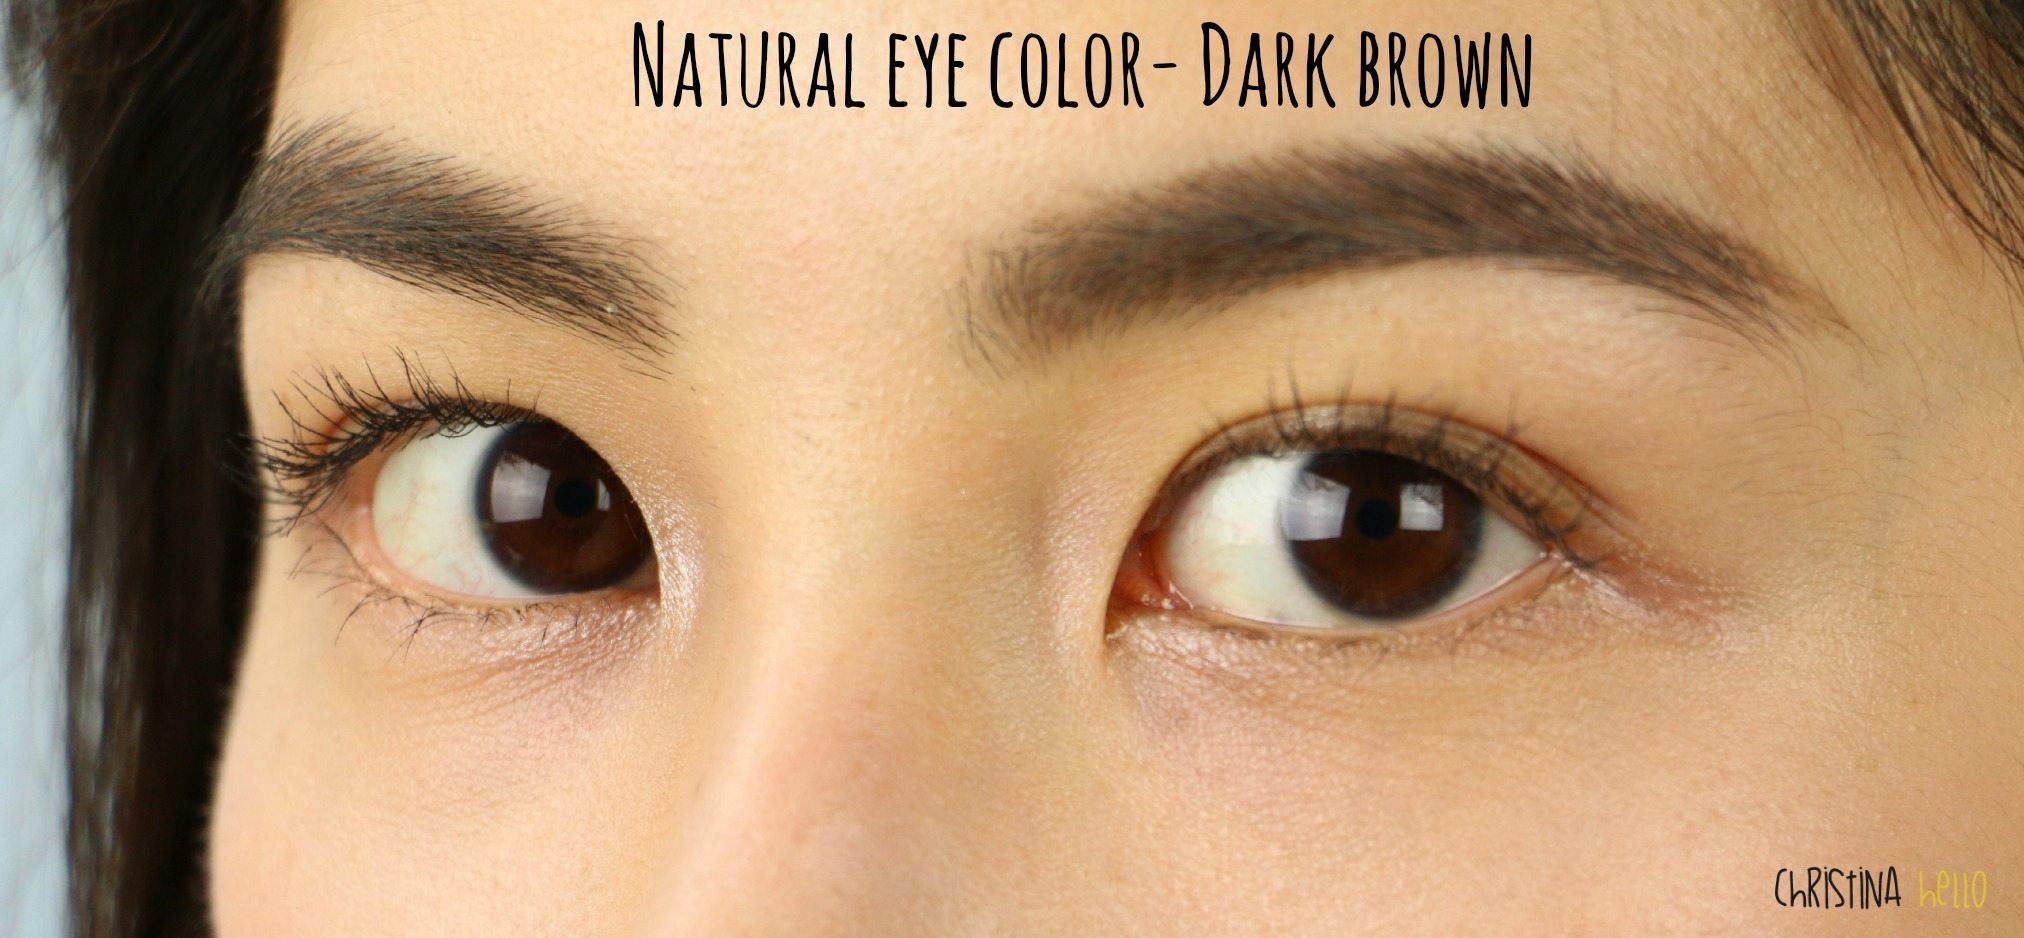 freshlook green contacts on brown eyes